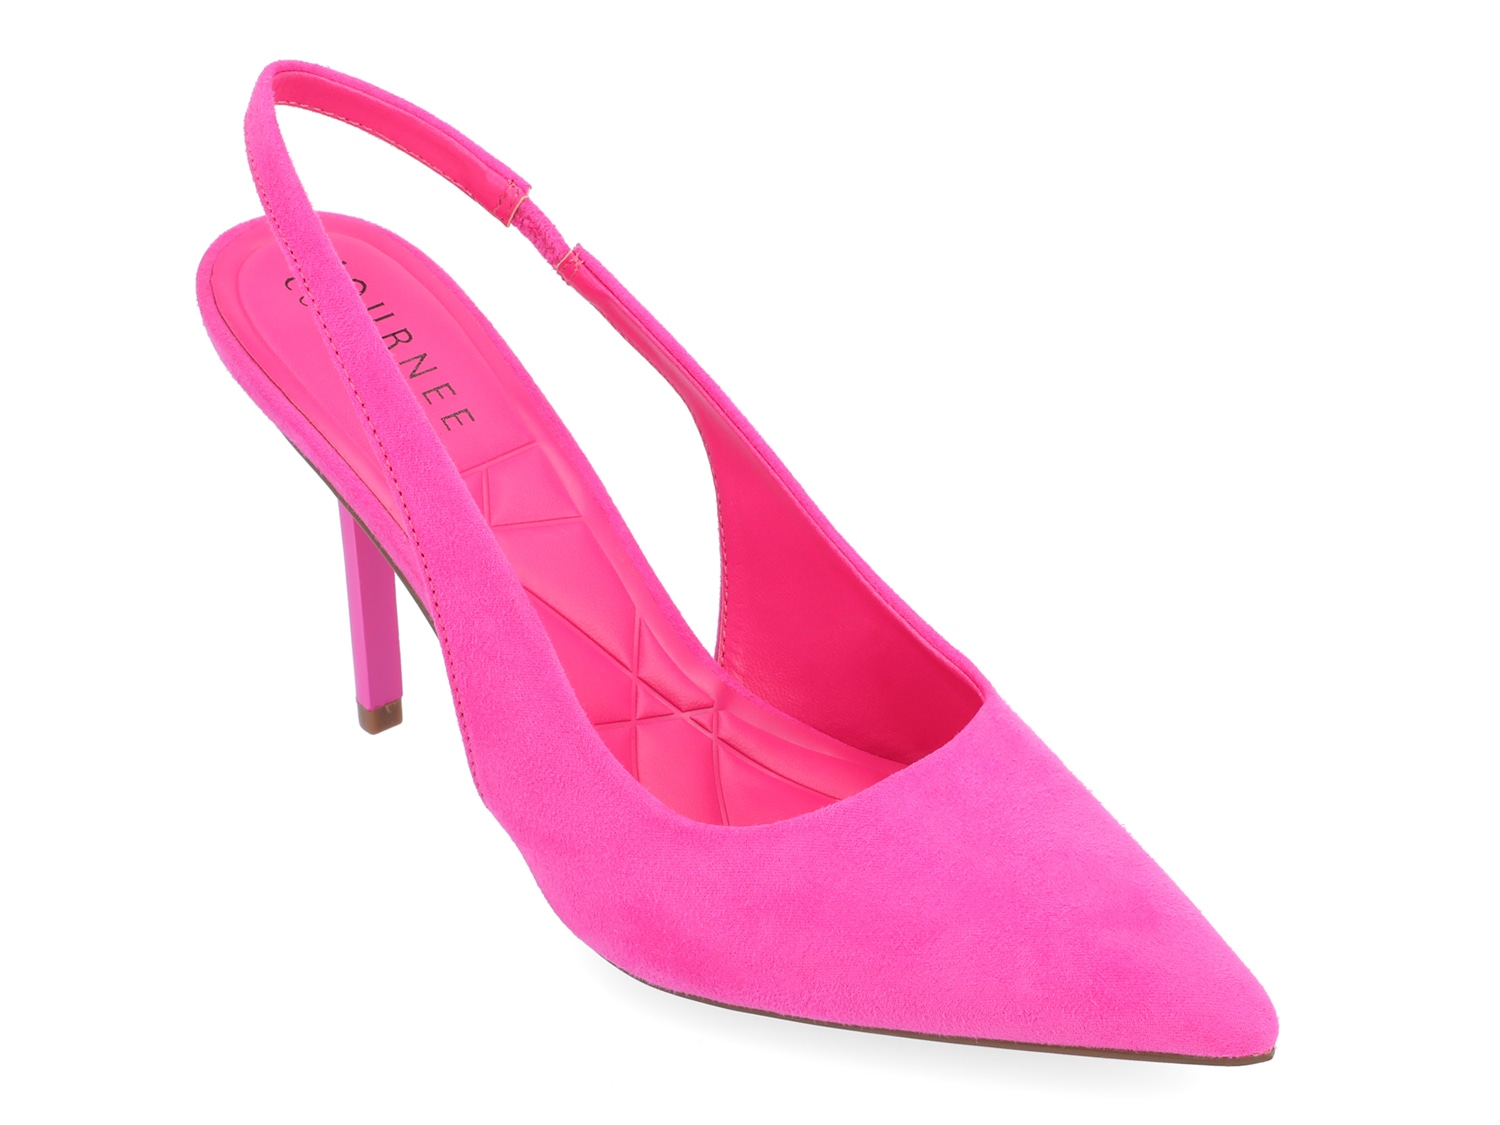 Journee Collection Elenney Pump - Free Shipping | DSW